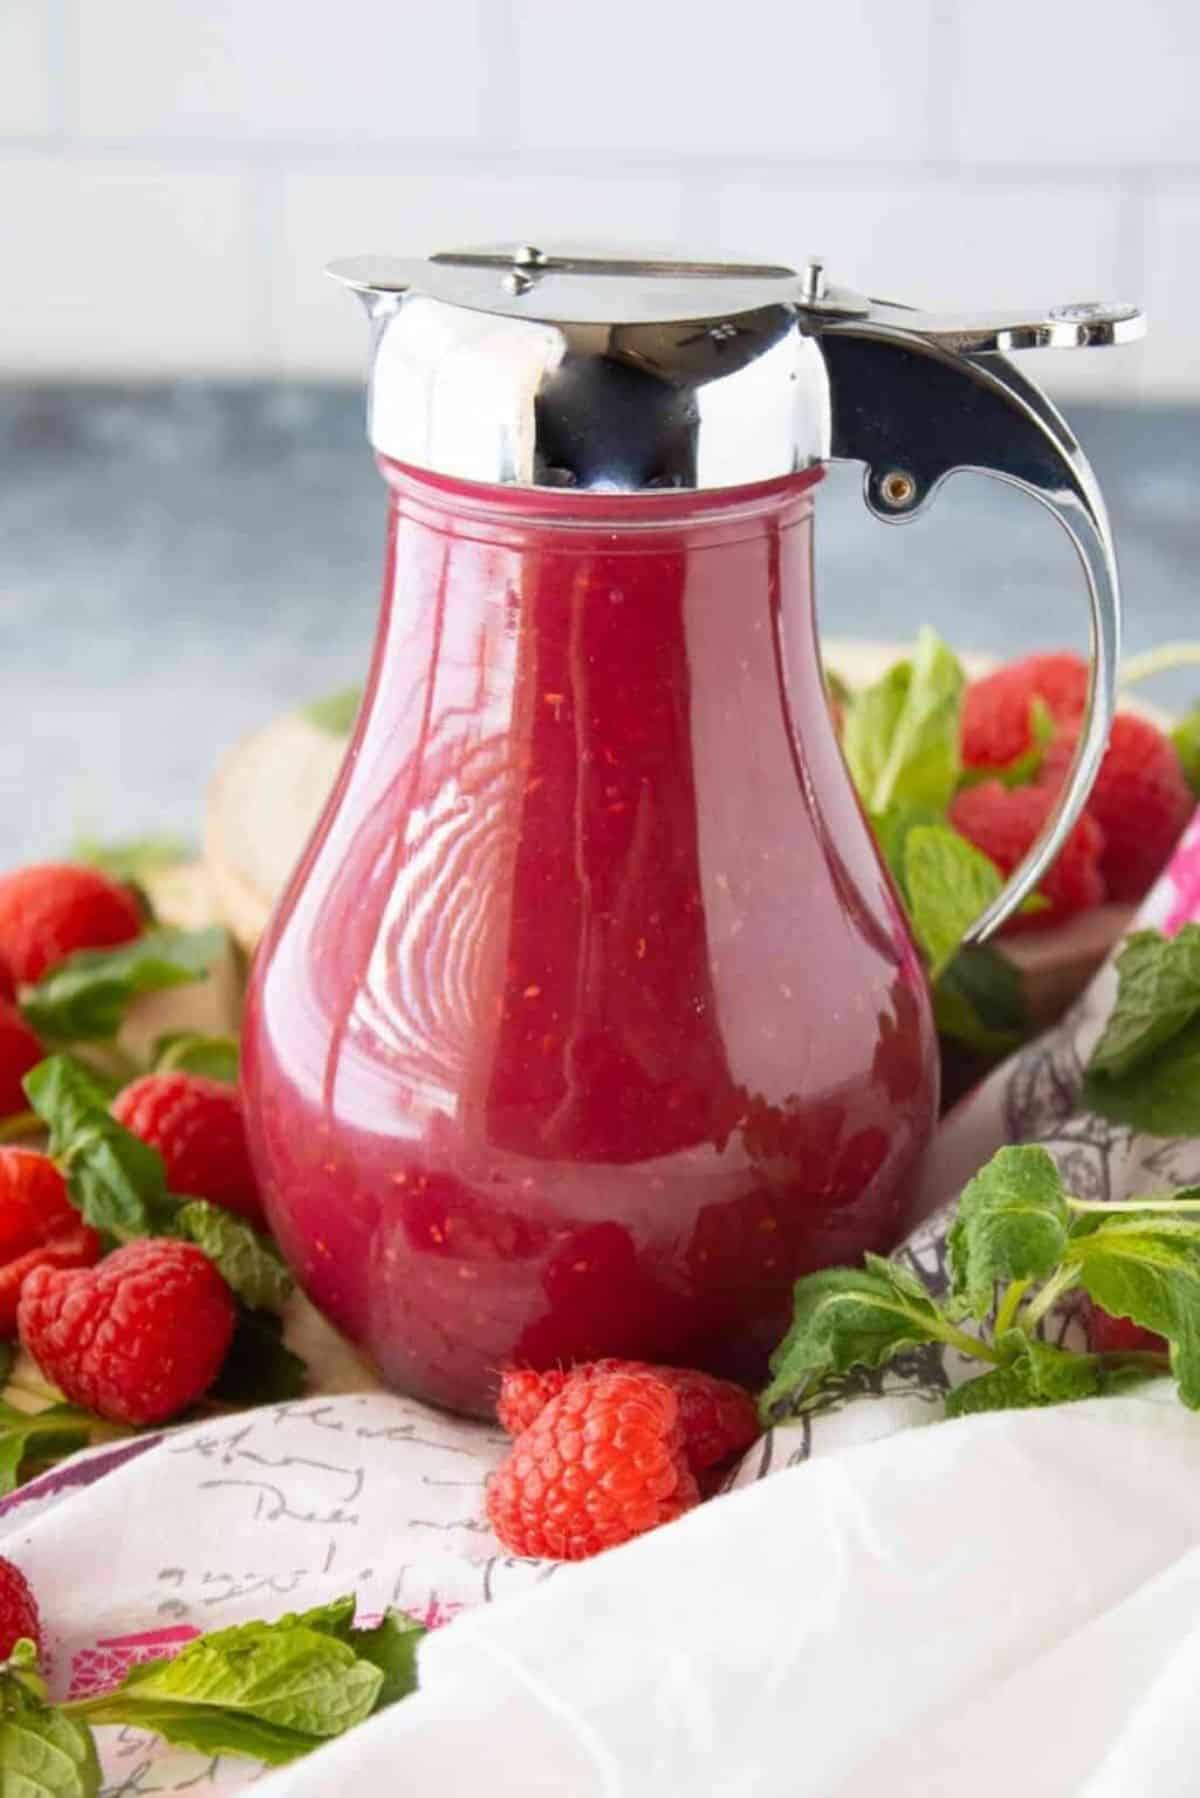 Raspberry Cream Syrup in a glass pitcher.